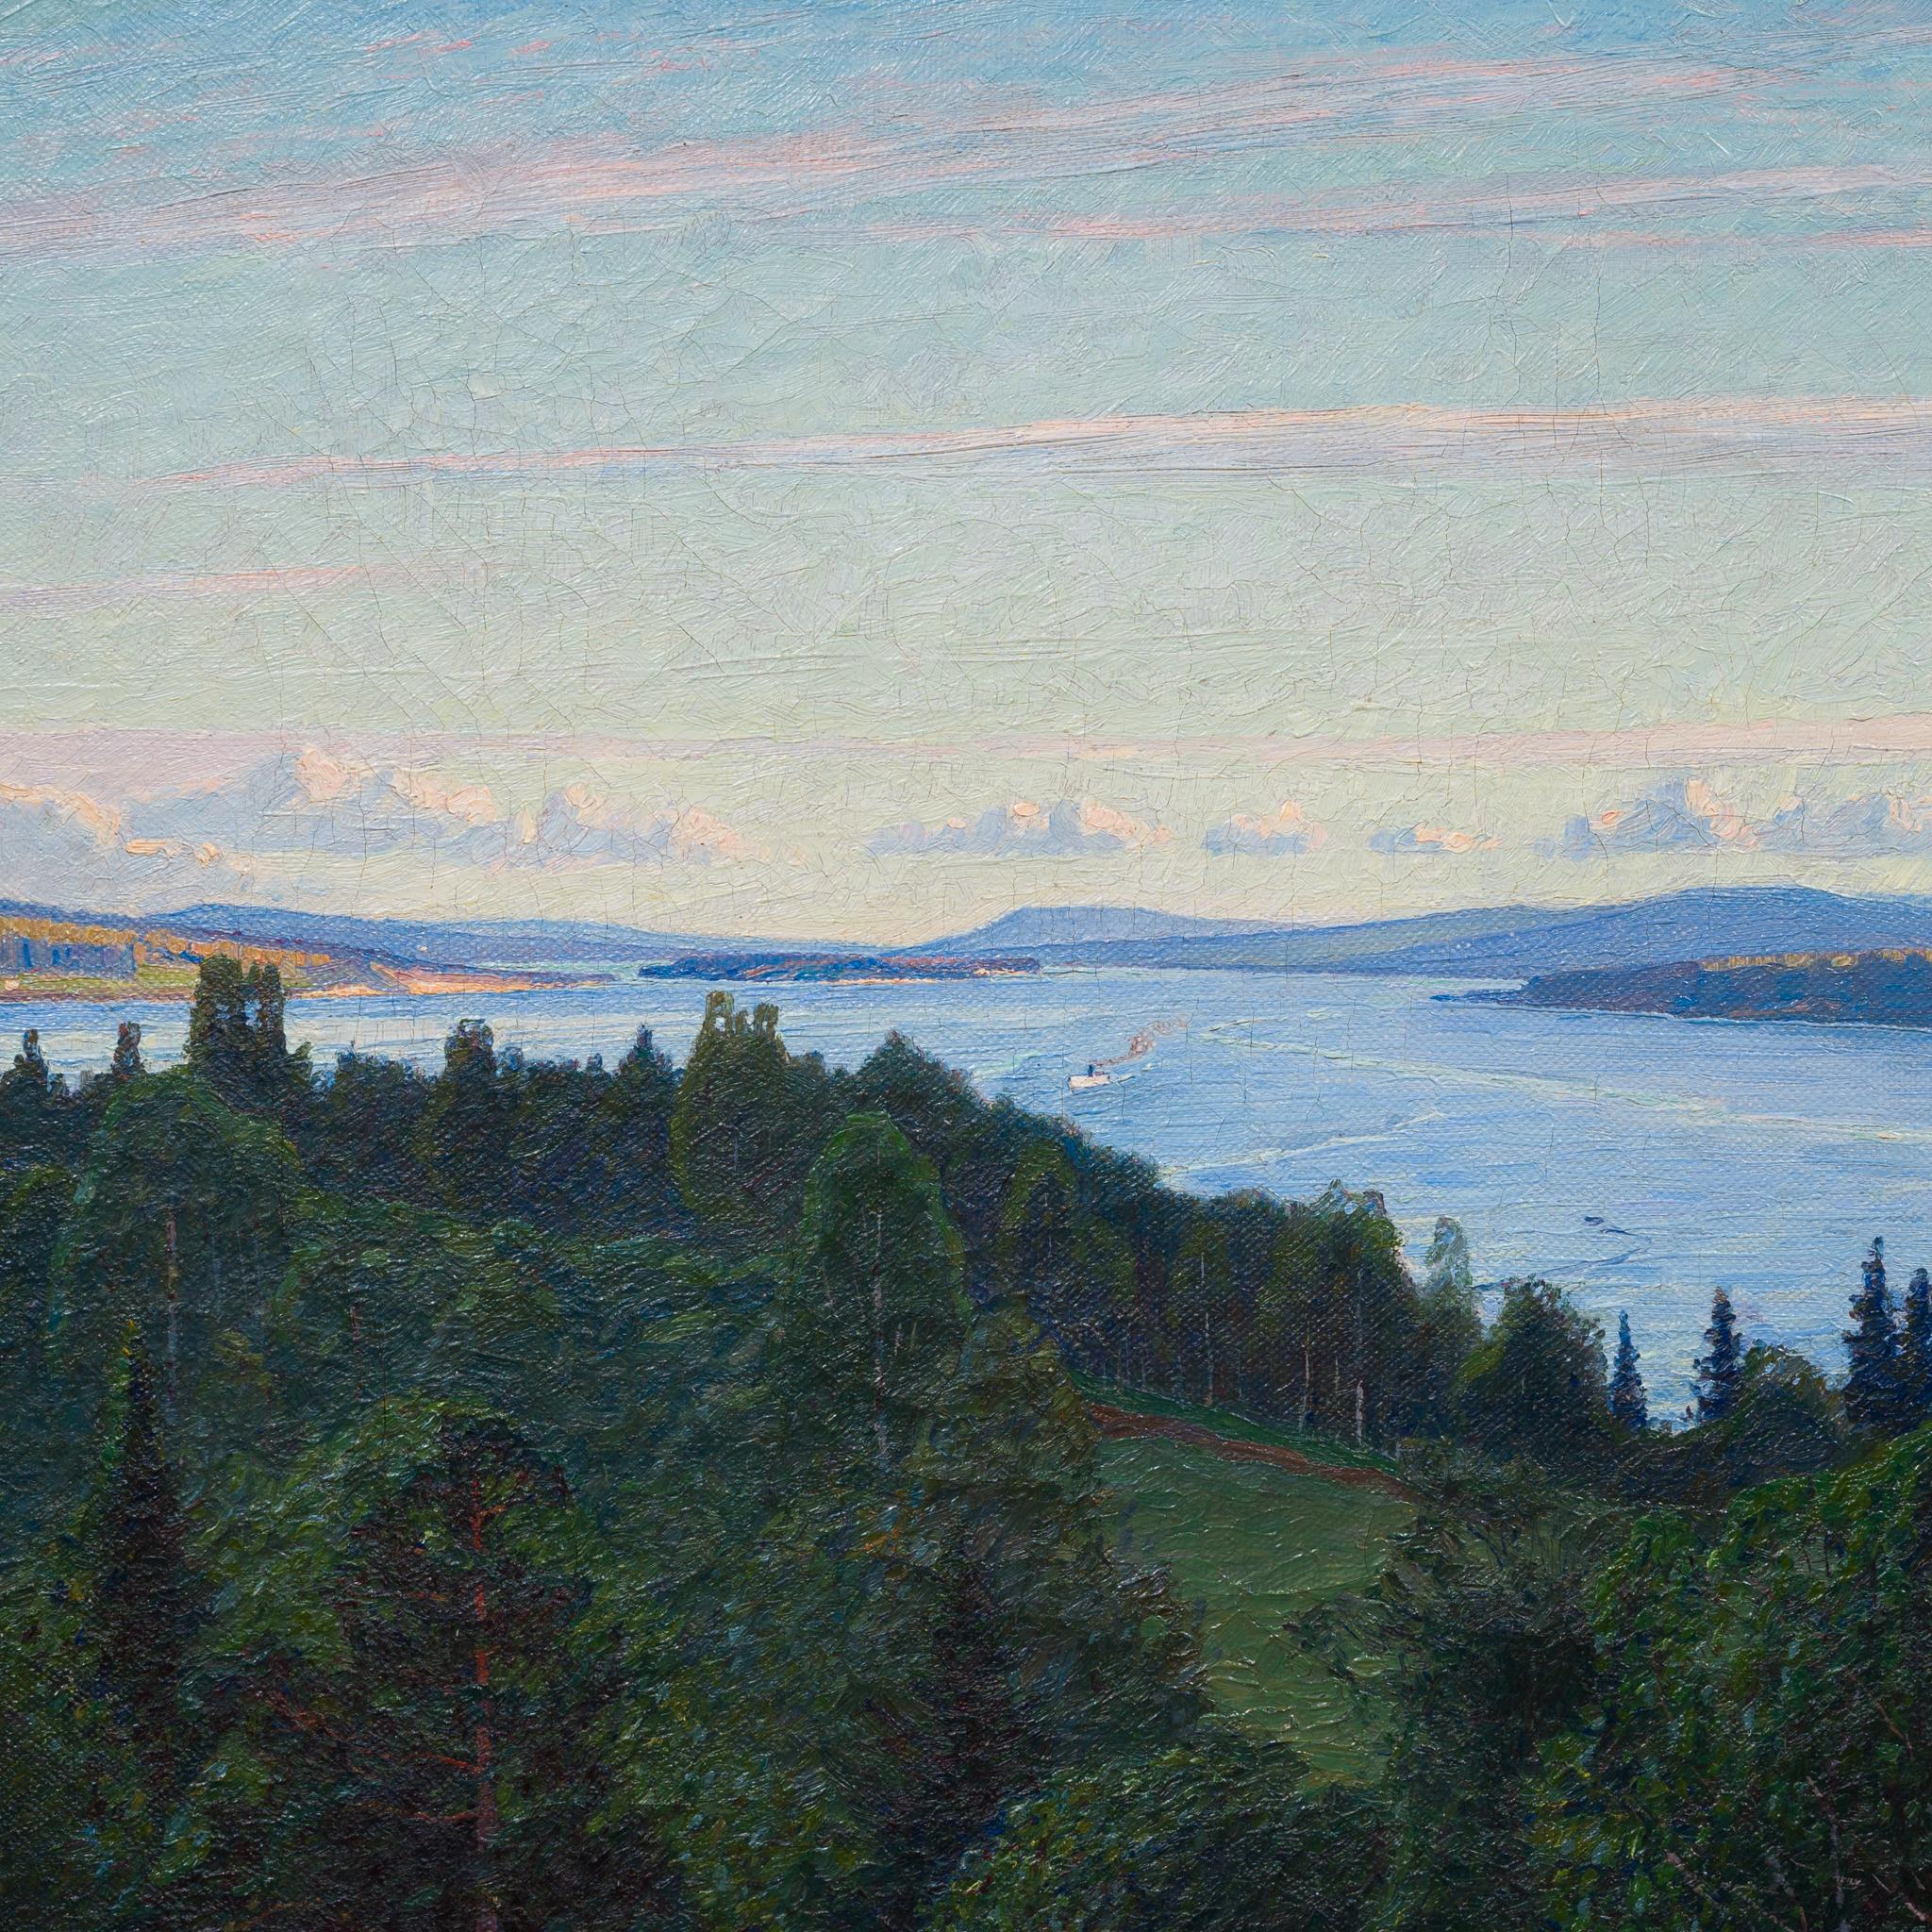 View Over a Forest and Open Water by Impressionist Painter Carl Johansson 1